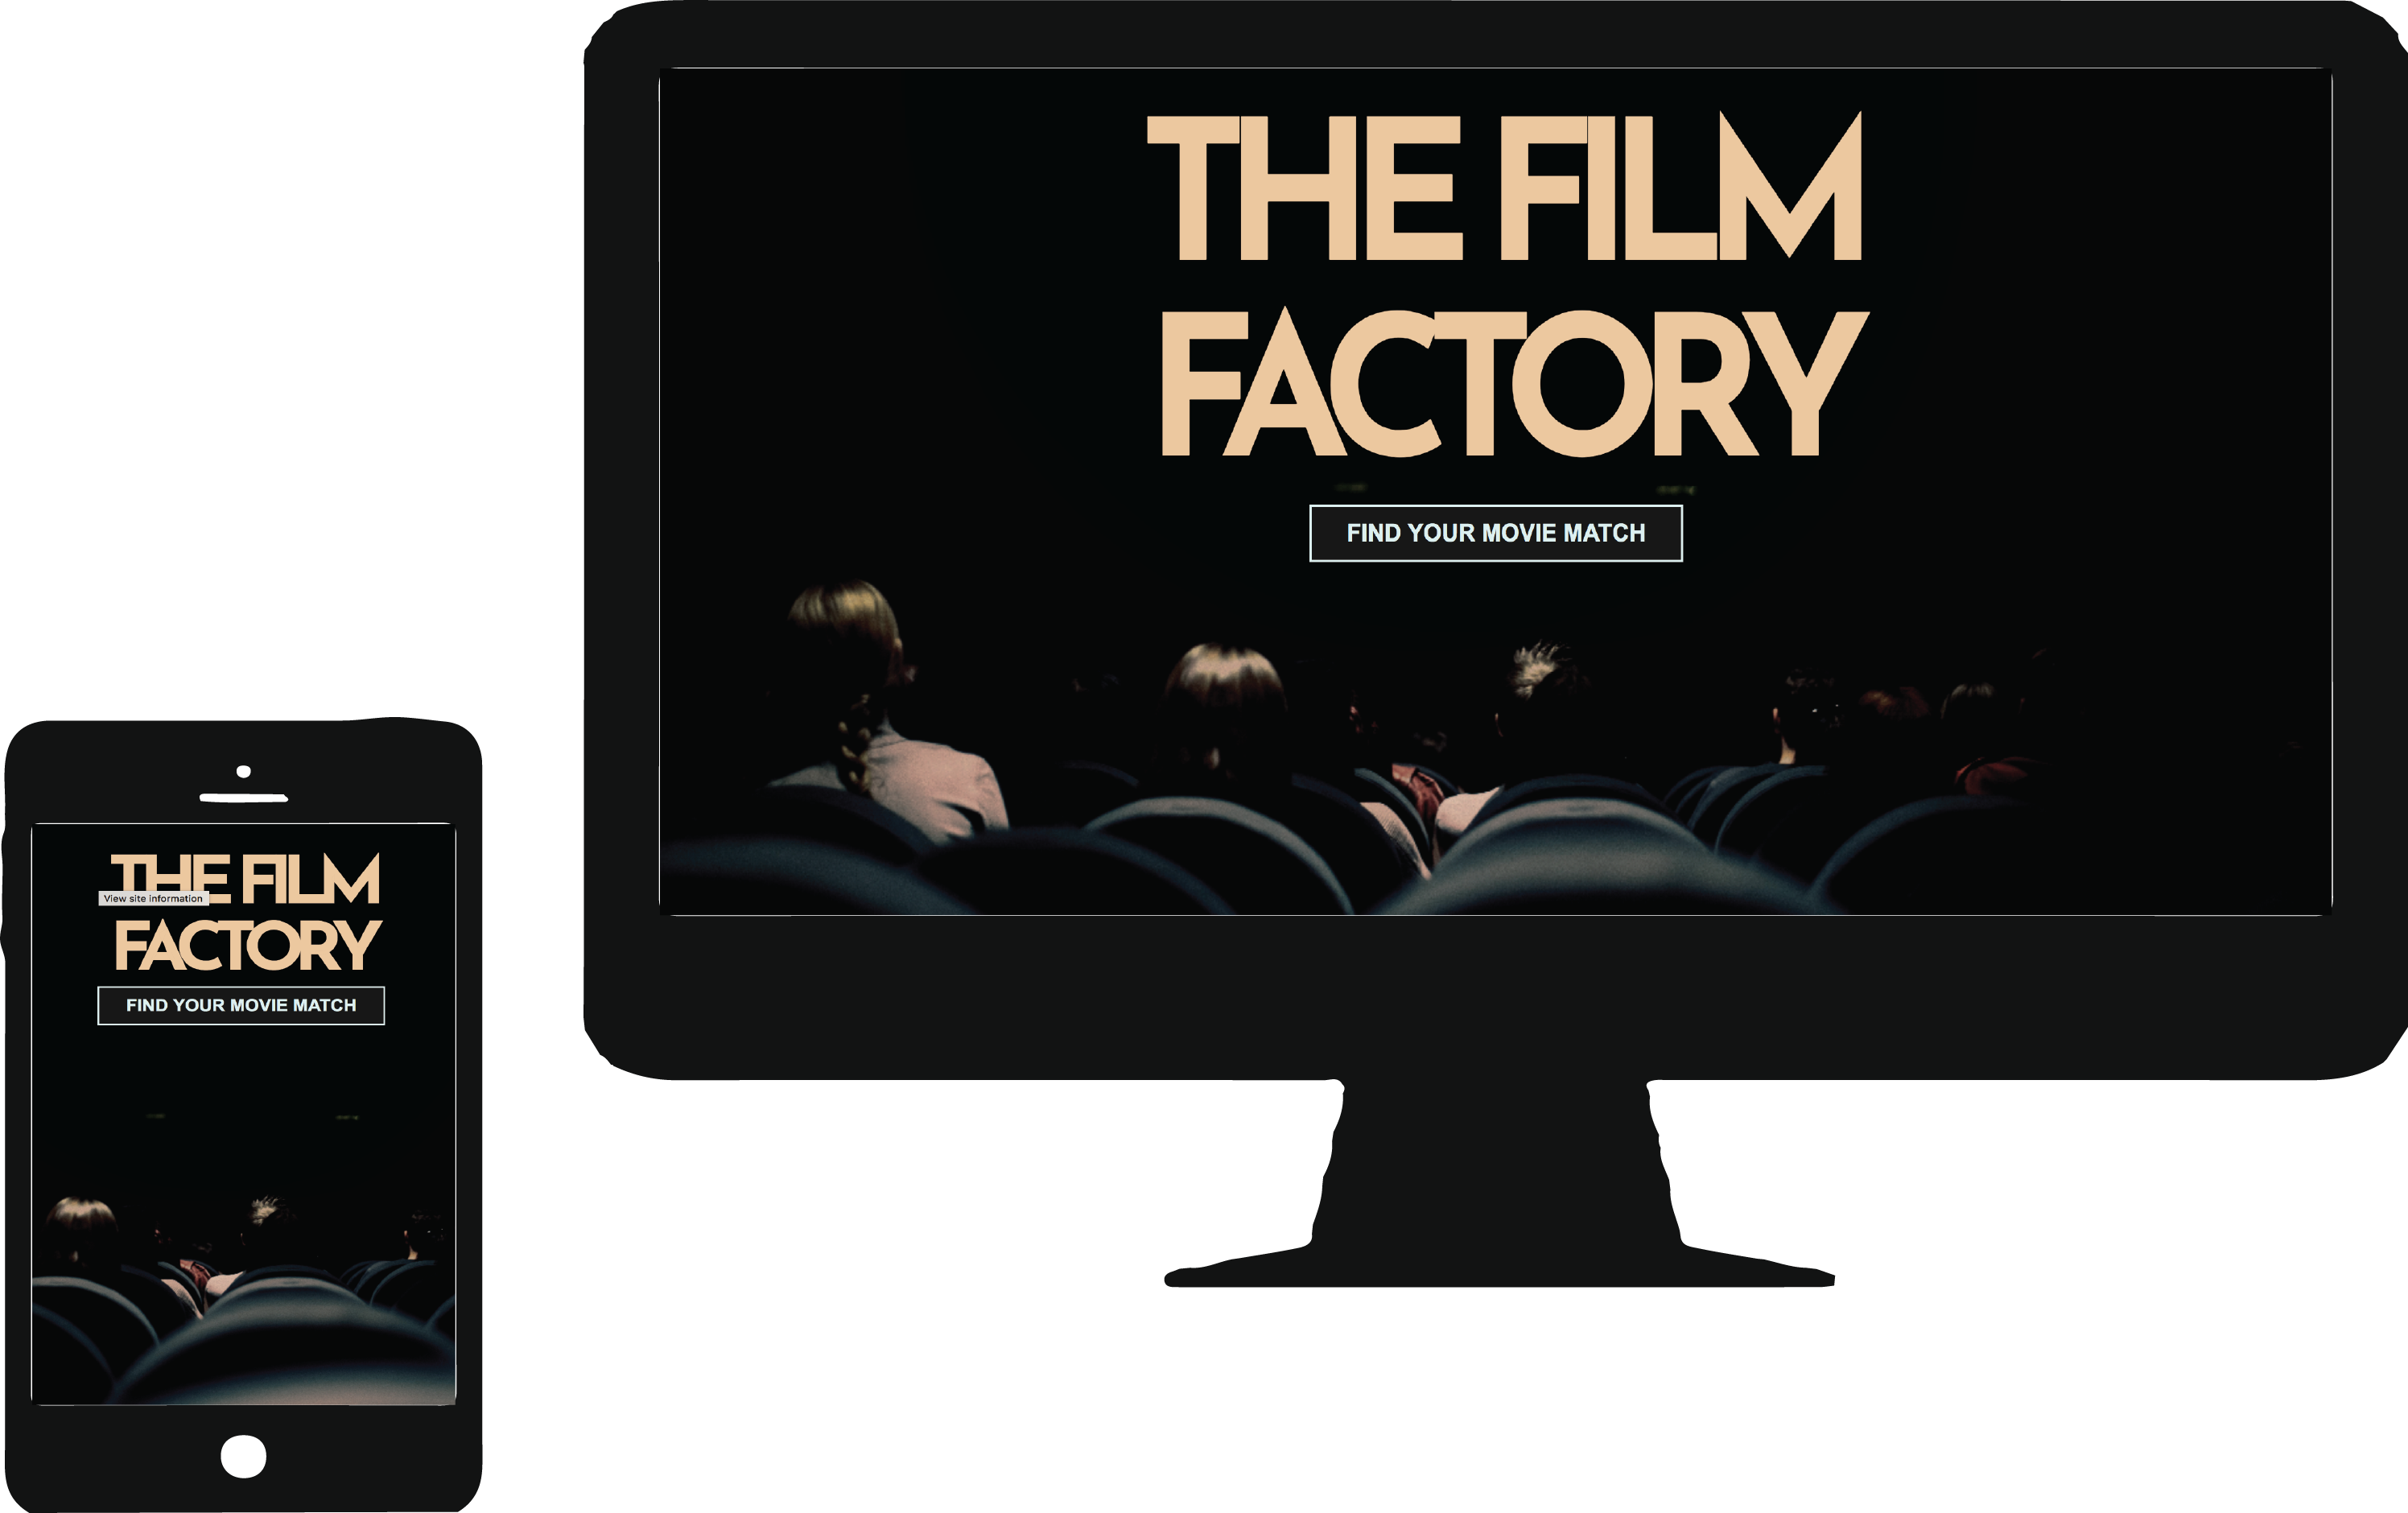 The Film Factory website displayed on desktop and mobile screens.